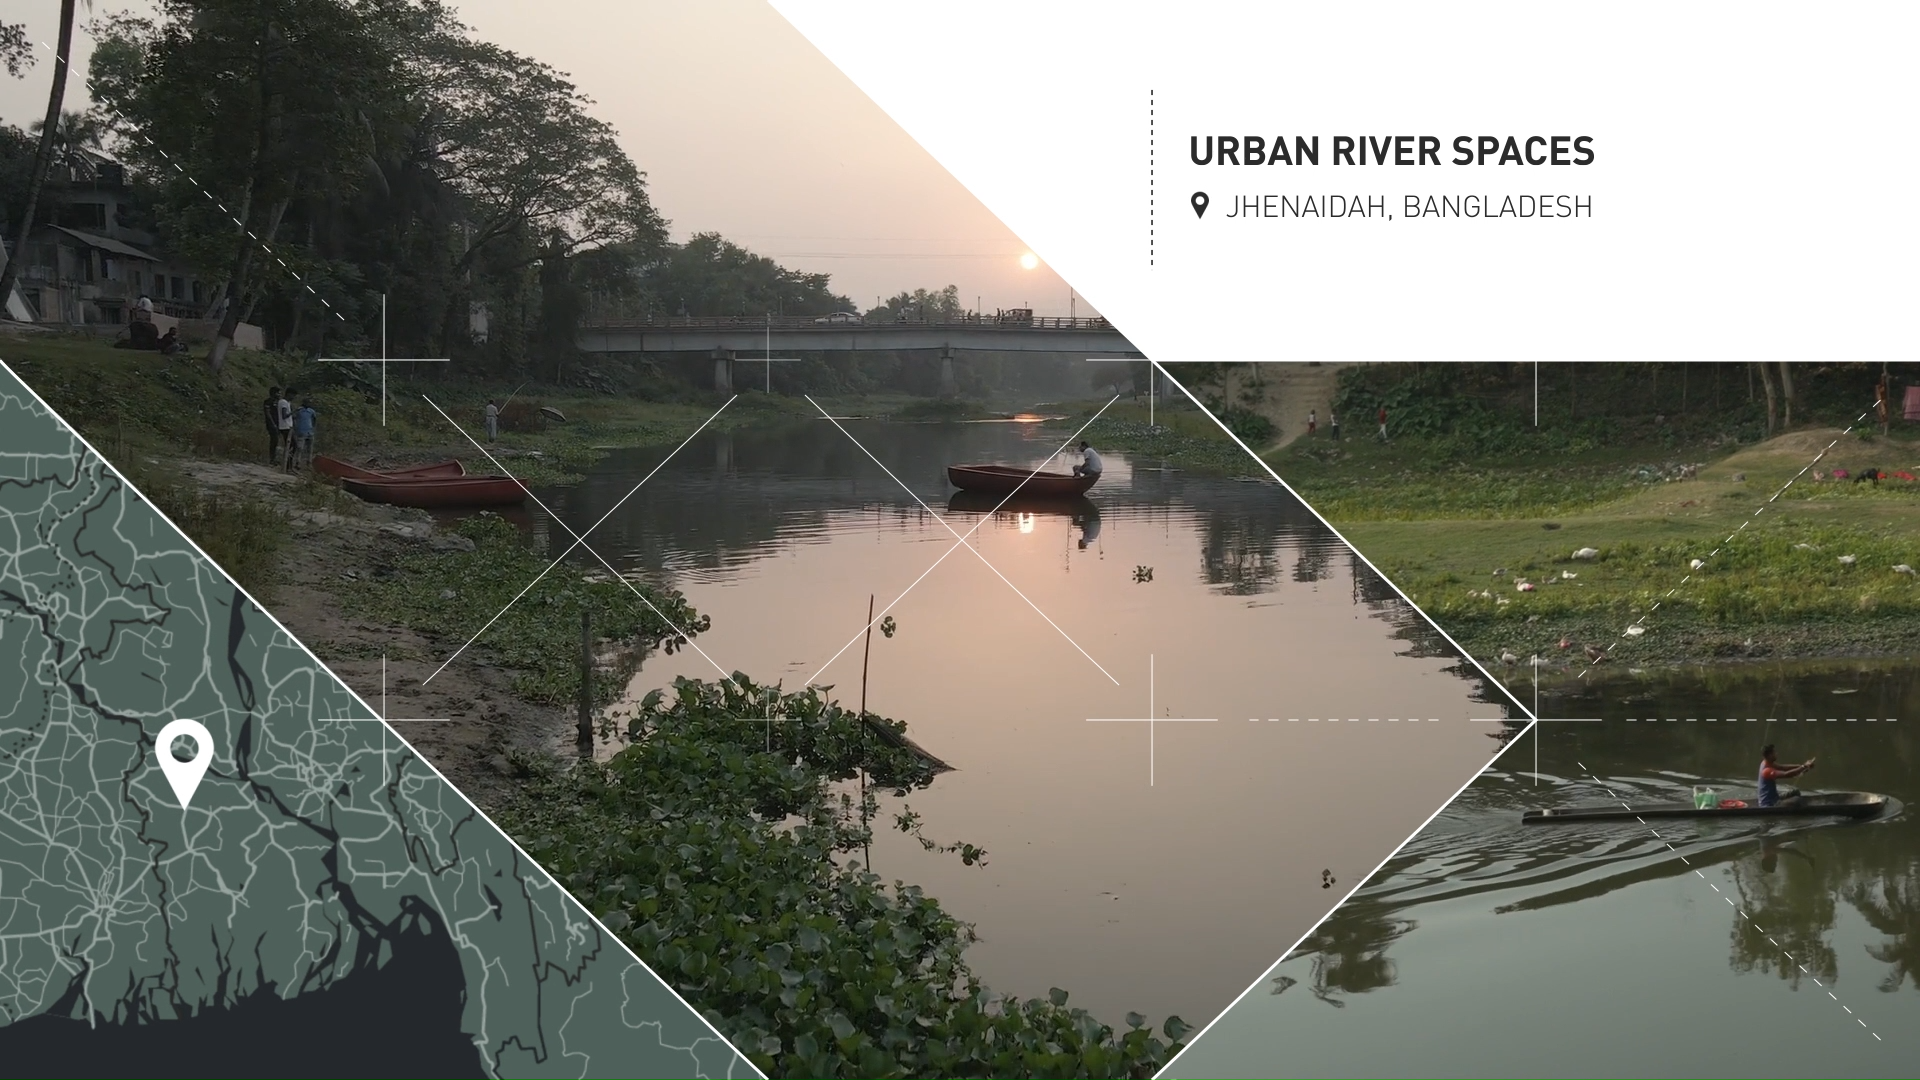 <p>Urban River Spaces, Jhenaidah, Bangladesh, by Co.Creation.Architects / Khondaker Hasibul Kabir: A community-driven project providing public spaces in a riverine city with 250,000 residents, offering walkways, gardens and cultural facilities, as well as environmental efforts to increase biodiversity along the river.</p>